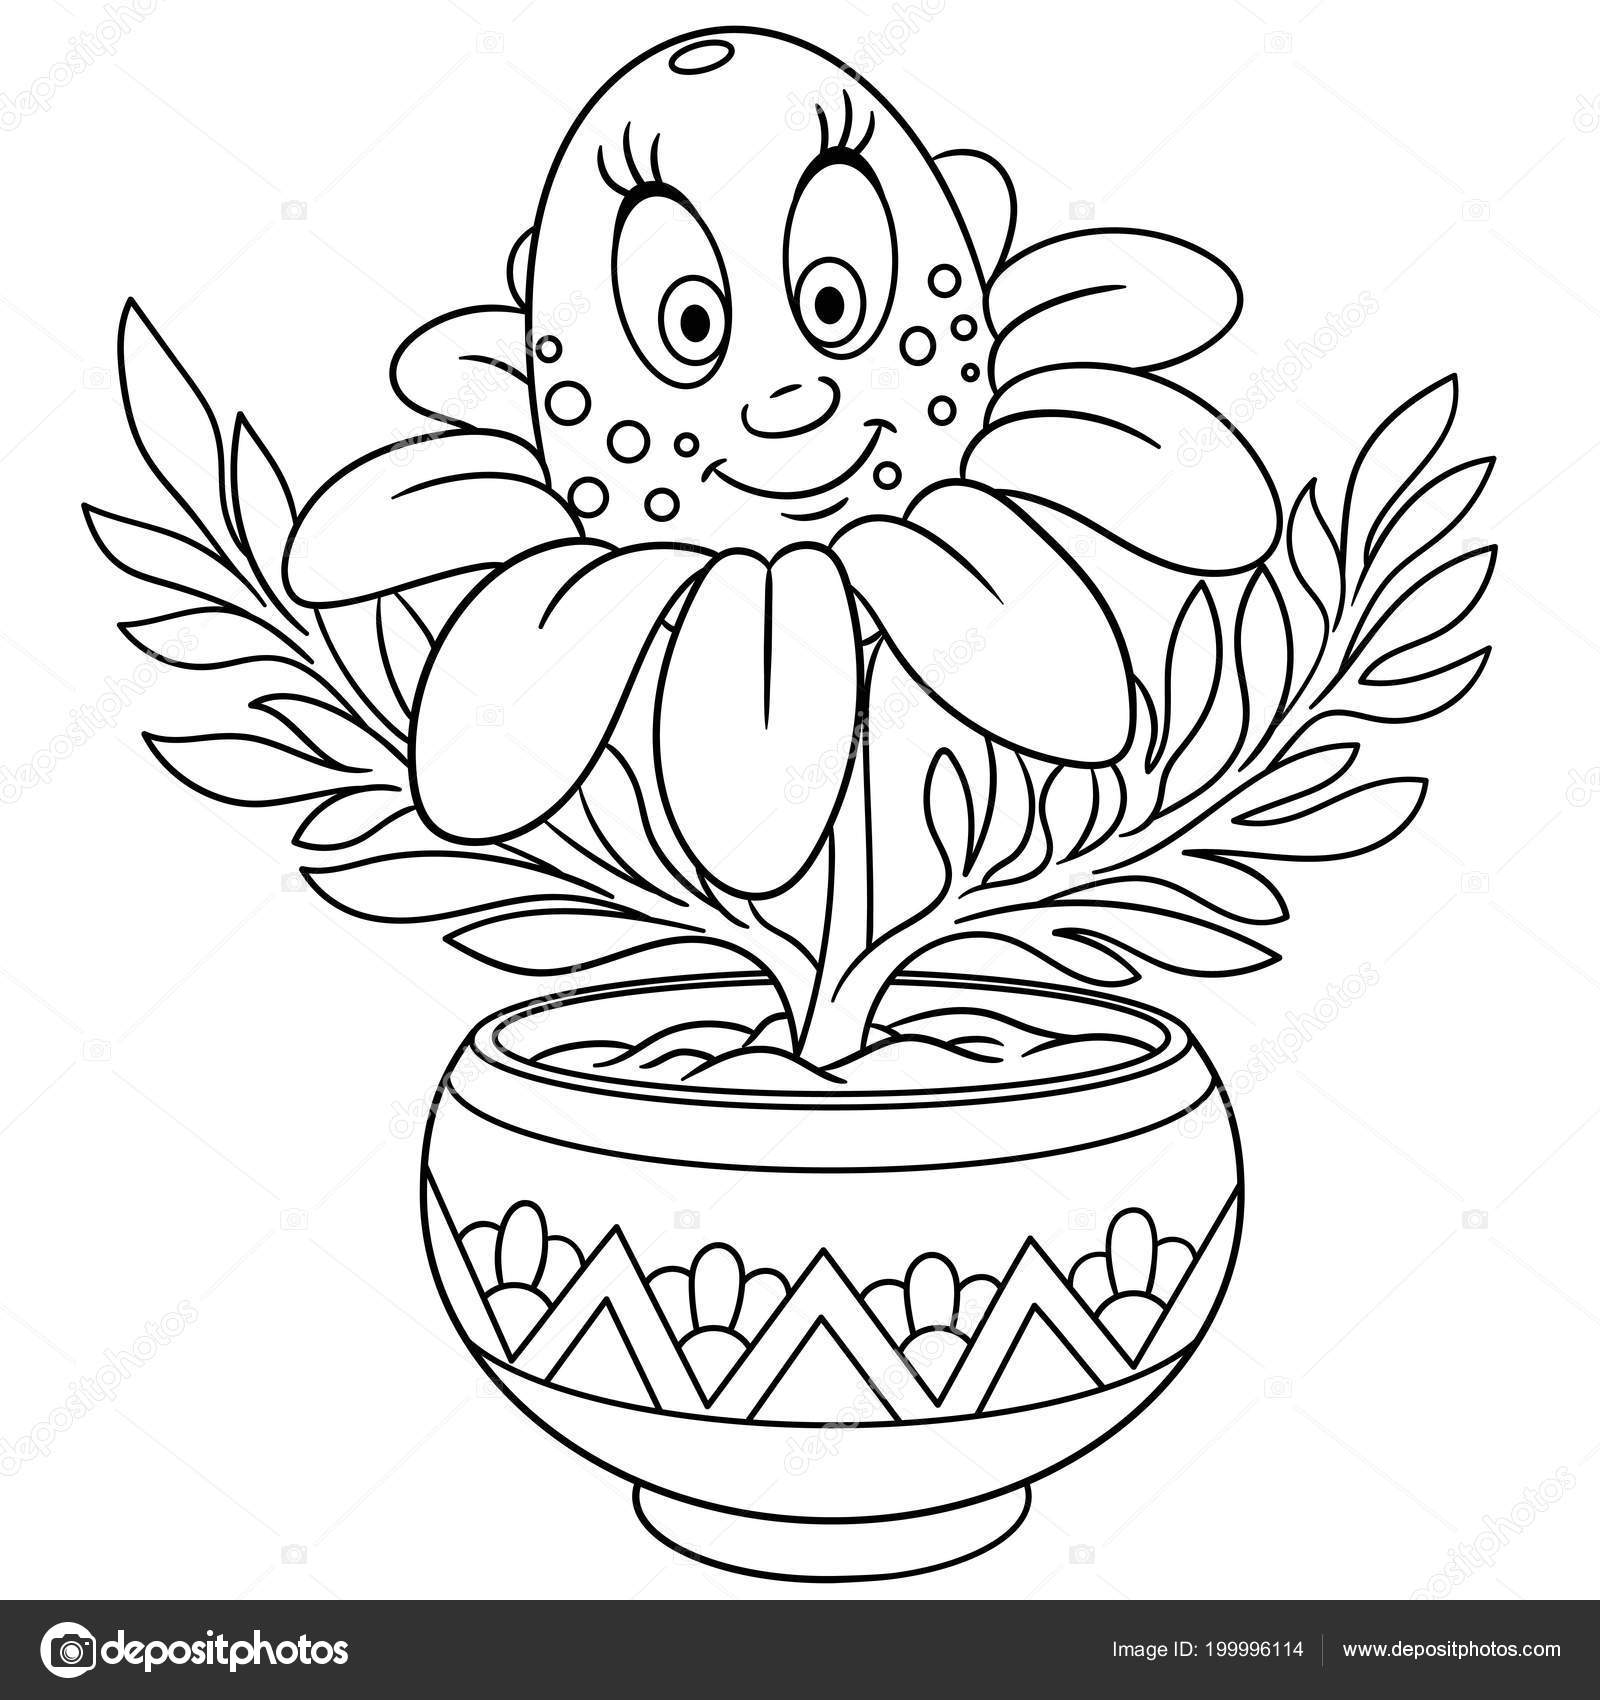 Daisy chamomile flower pot coloring page colouring picture coloring book stock vector by sybirko